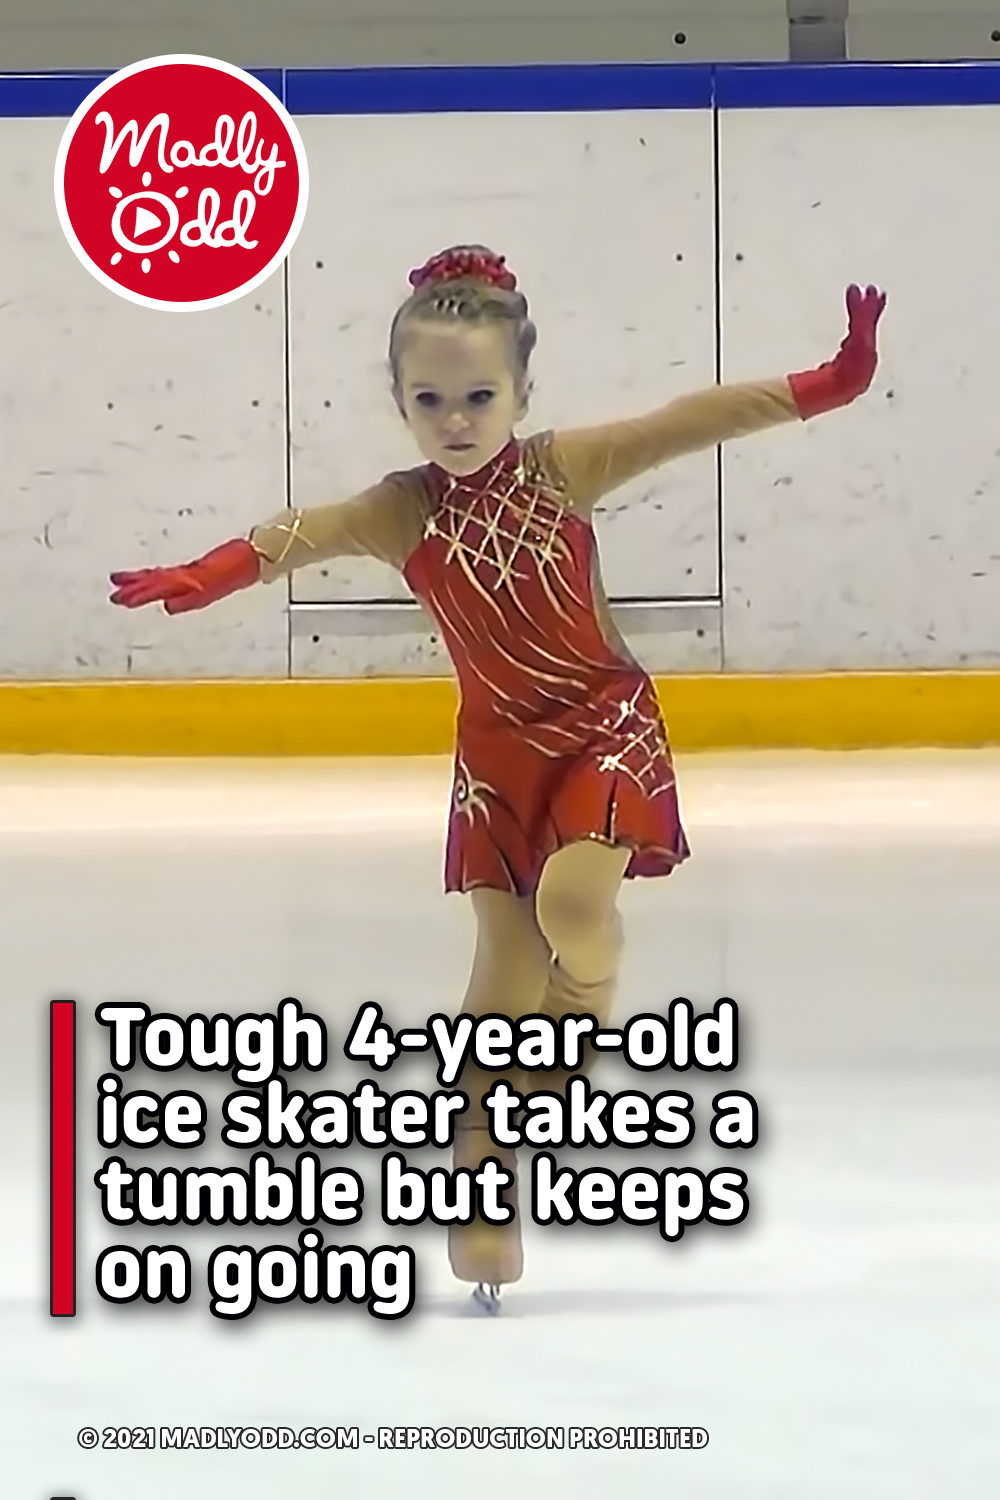 Tough 4-year-old ice skater takes a tumble but keeps on going